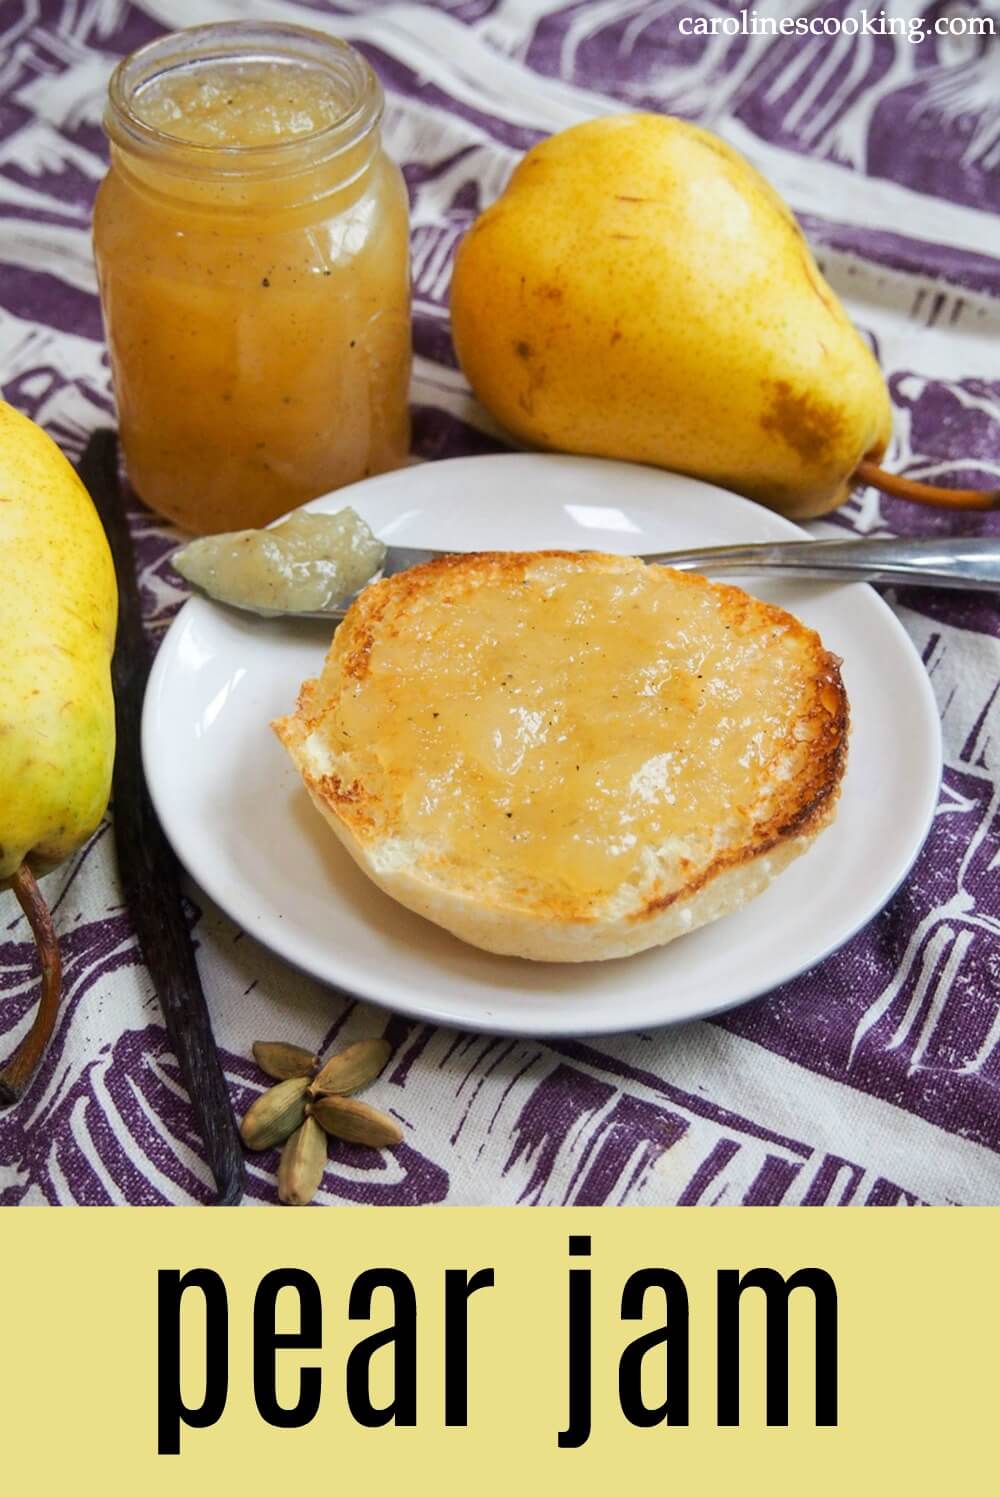 This pear jam is flavored with a hint of vanilla and cardamom that add a hint of warmth but let the pear flavors shine.  Easy and delicious!  #pear #jam